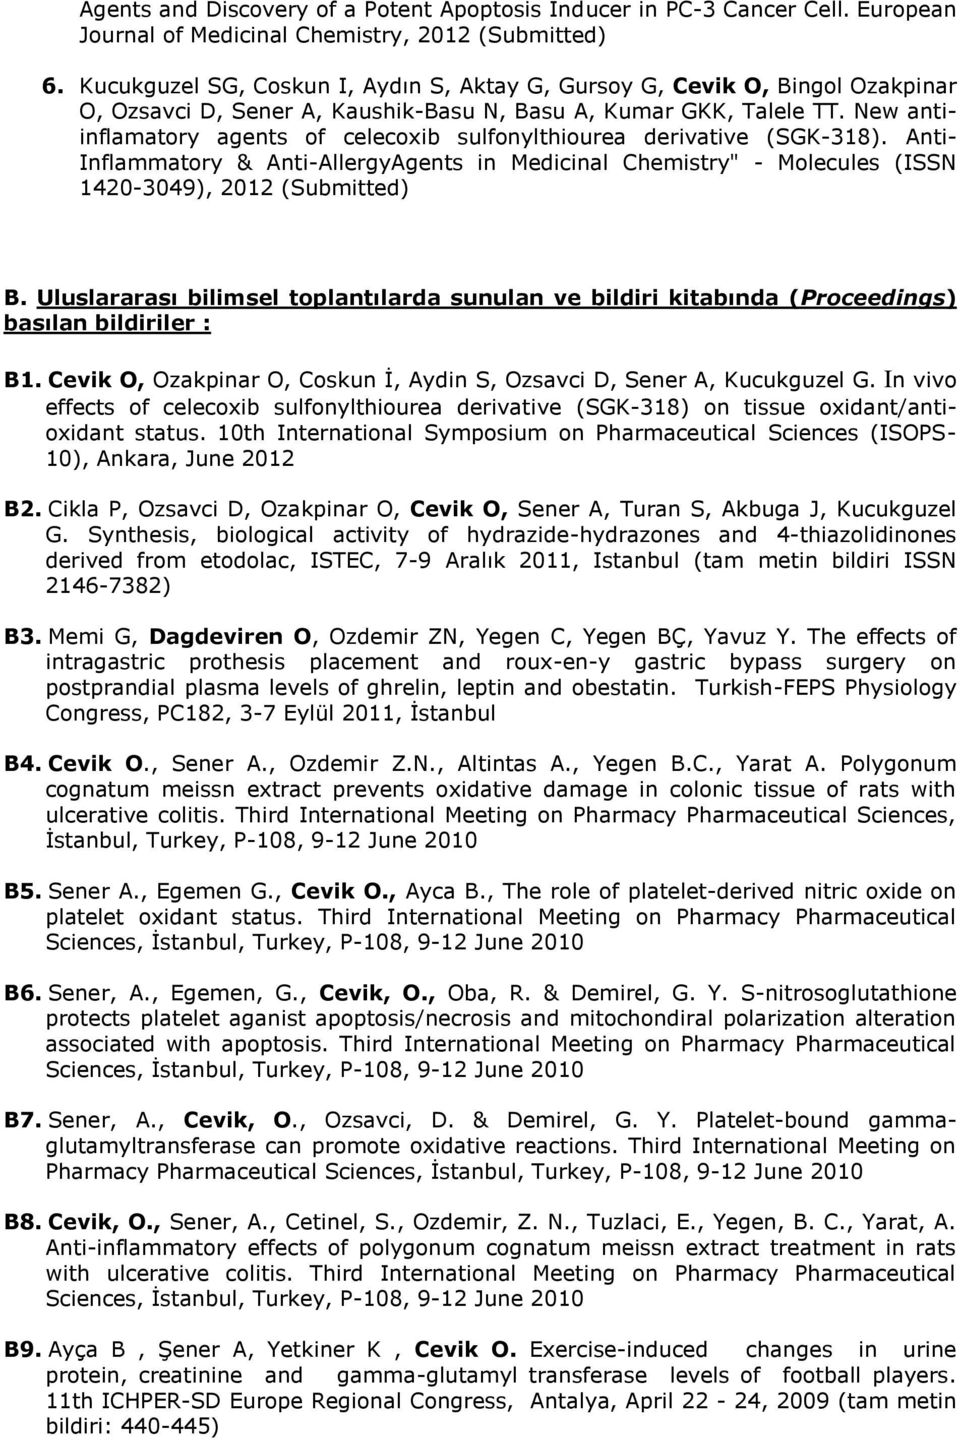 New antiinflamatory agents of celecoxib sulfonylthiourea derivative (SGK-318). Anti- Inflammatory & Anti-AllergyAgents in Medicinal Chemistry" - Molecules (ISSN 1420-3049), 2012 (Submitted) B.